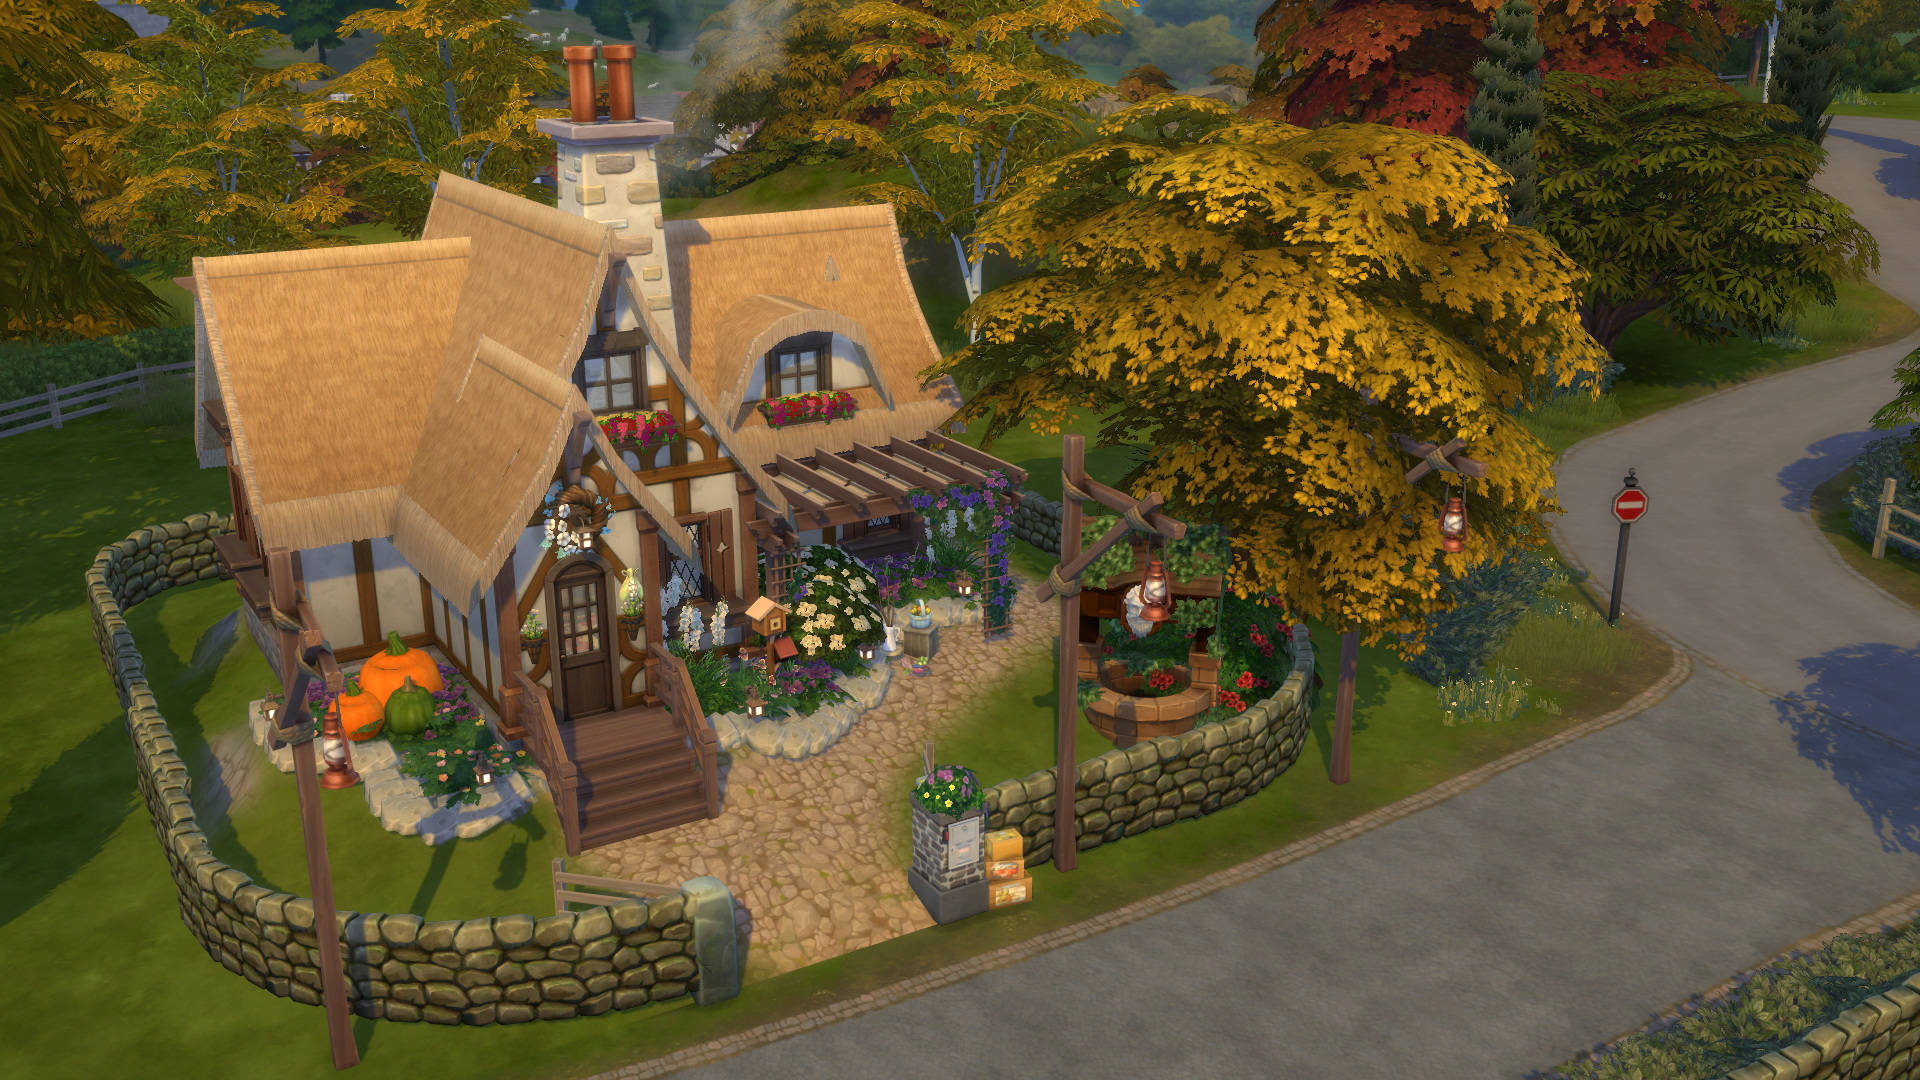 Tiny Witch Cottage 20x20 by bradybrad7 at Mod The Sims 4 » Sims 4 Updates